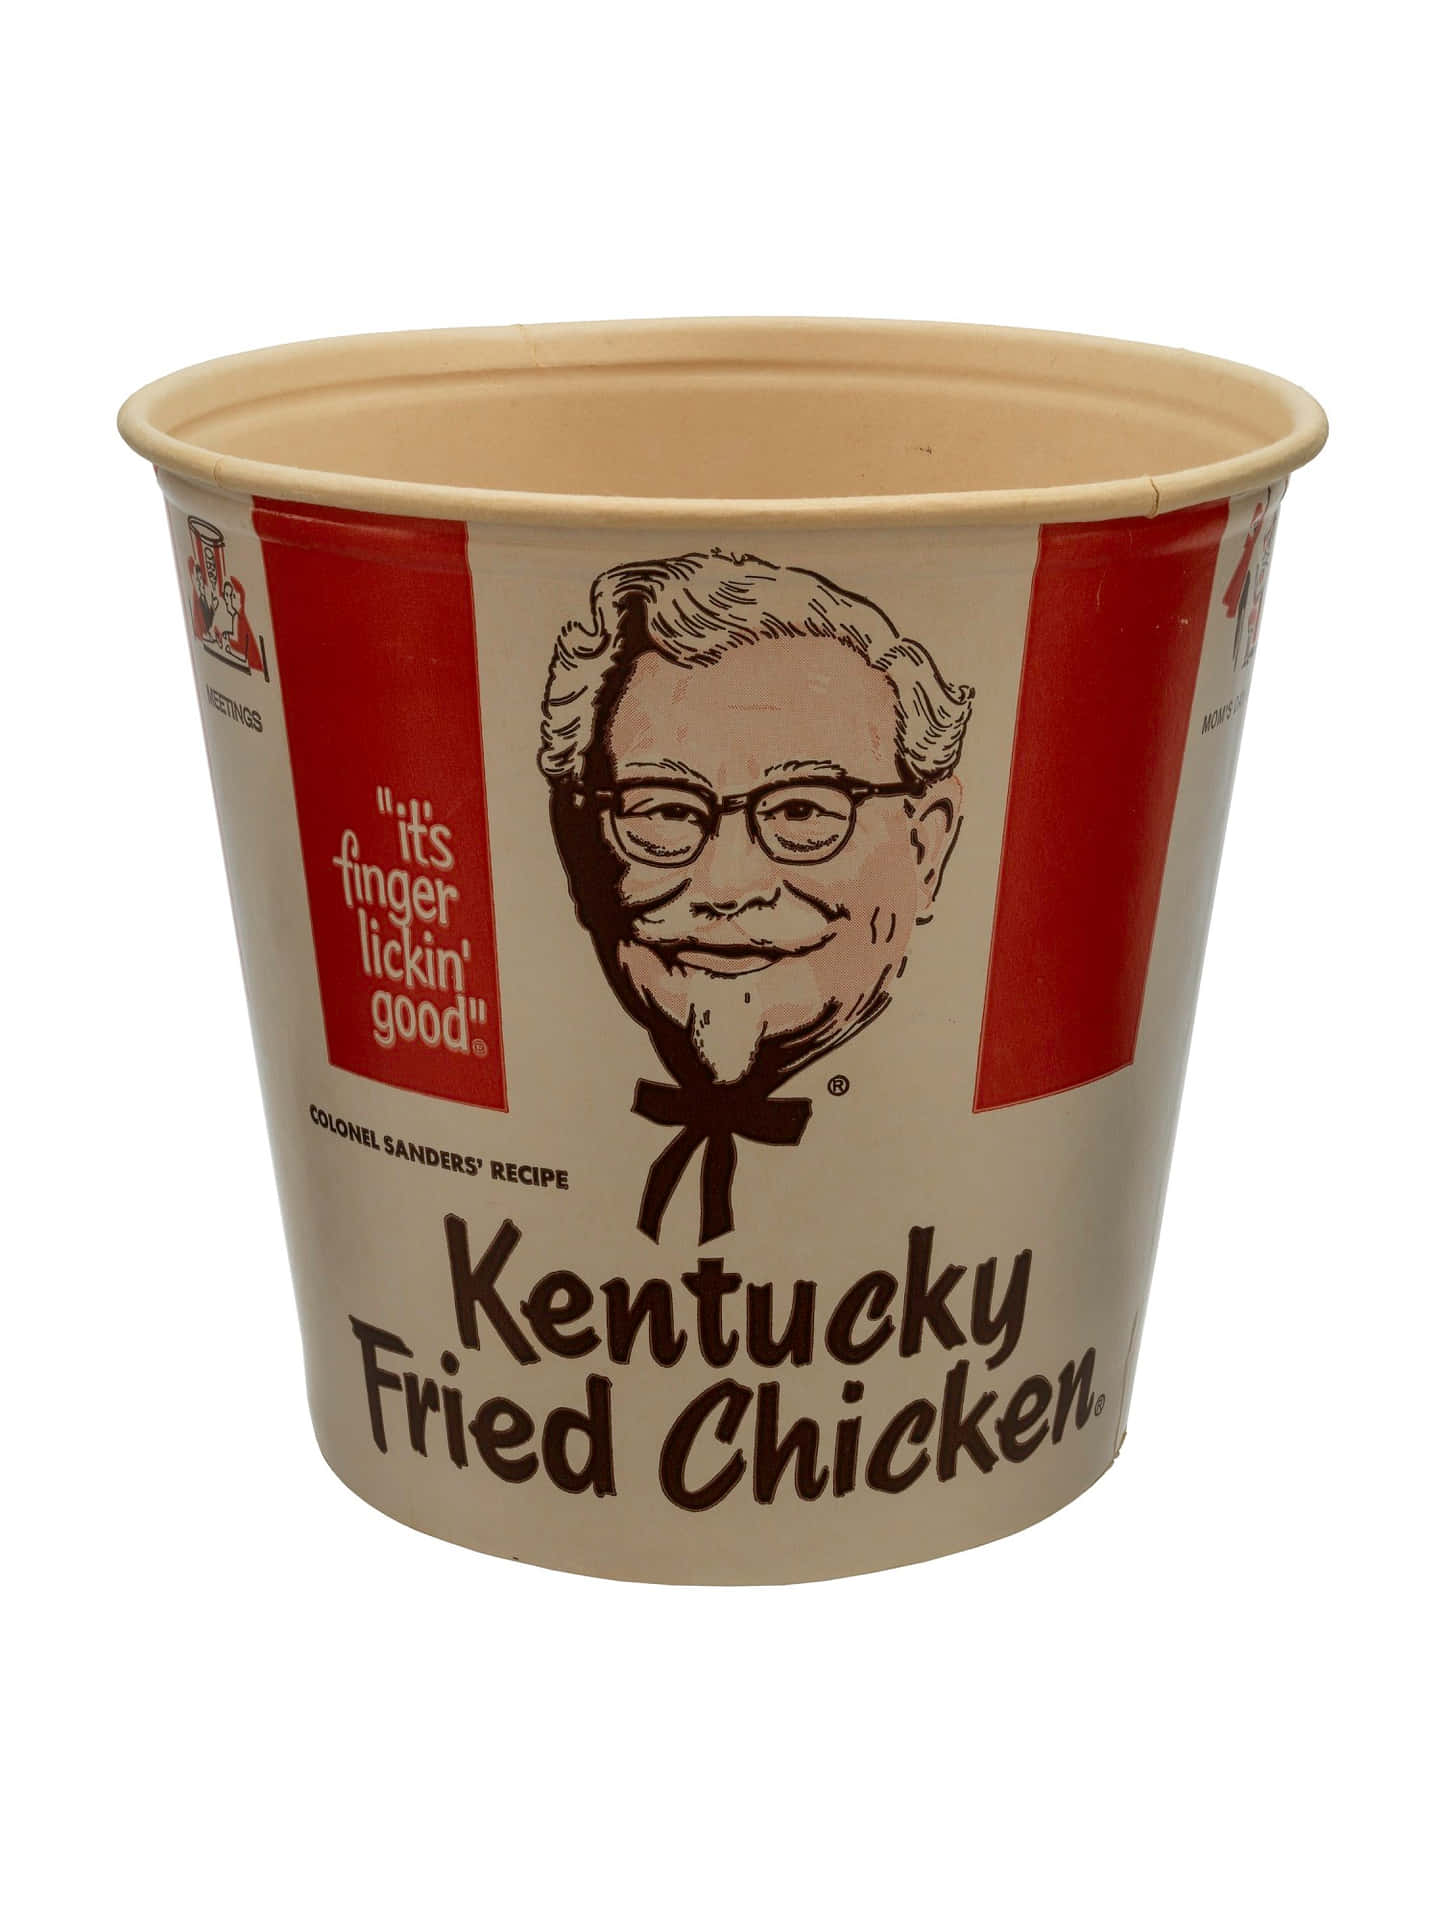 "A bucket of delicious KFC chicken for the whole family!"